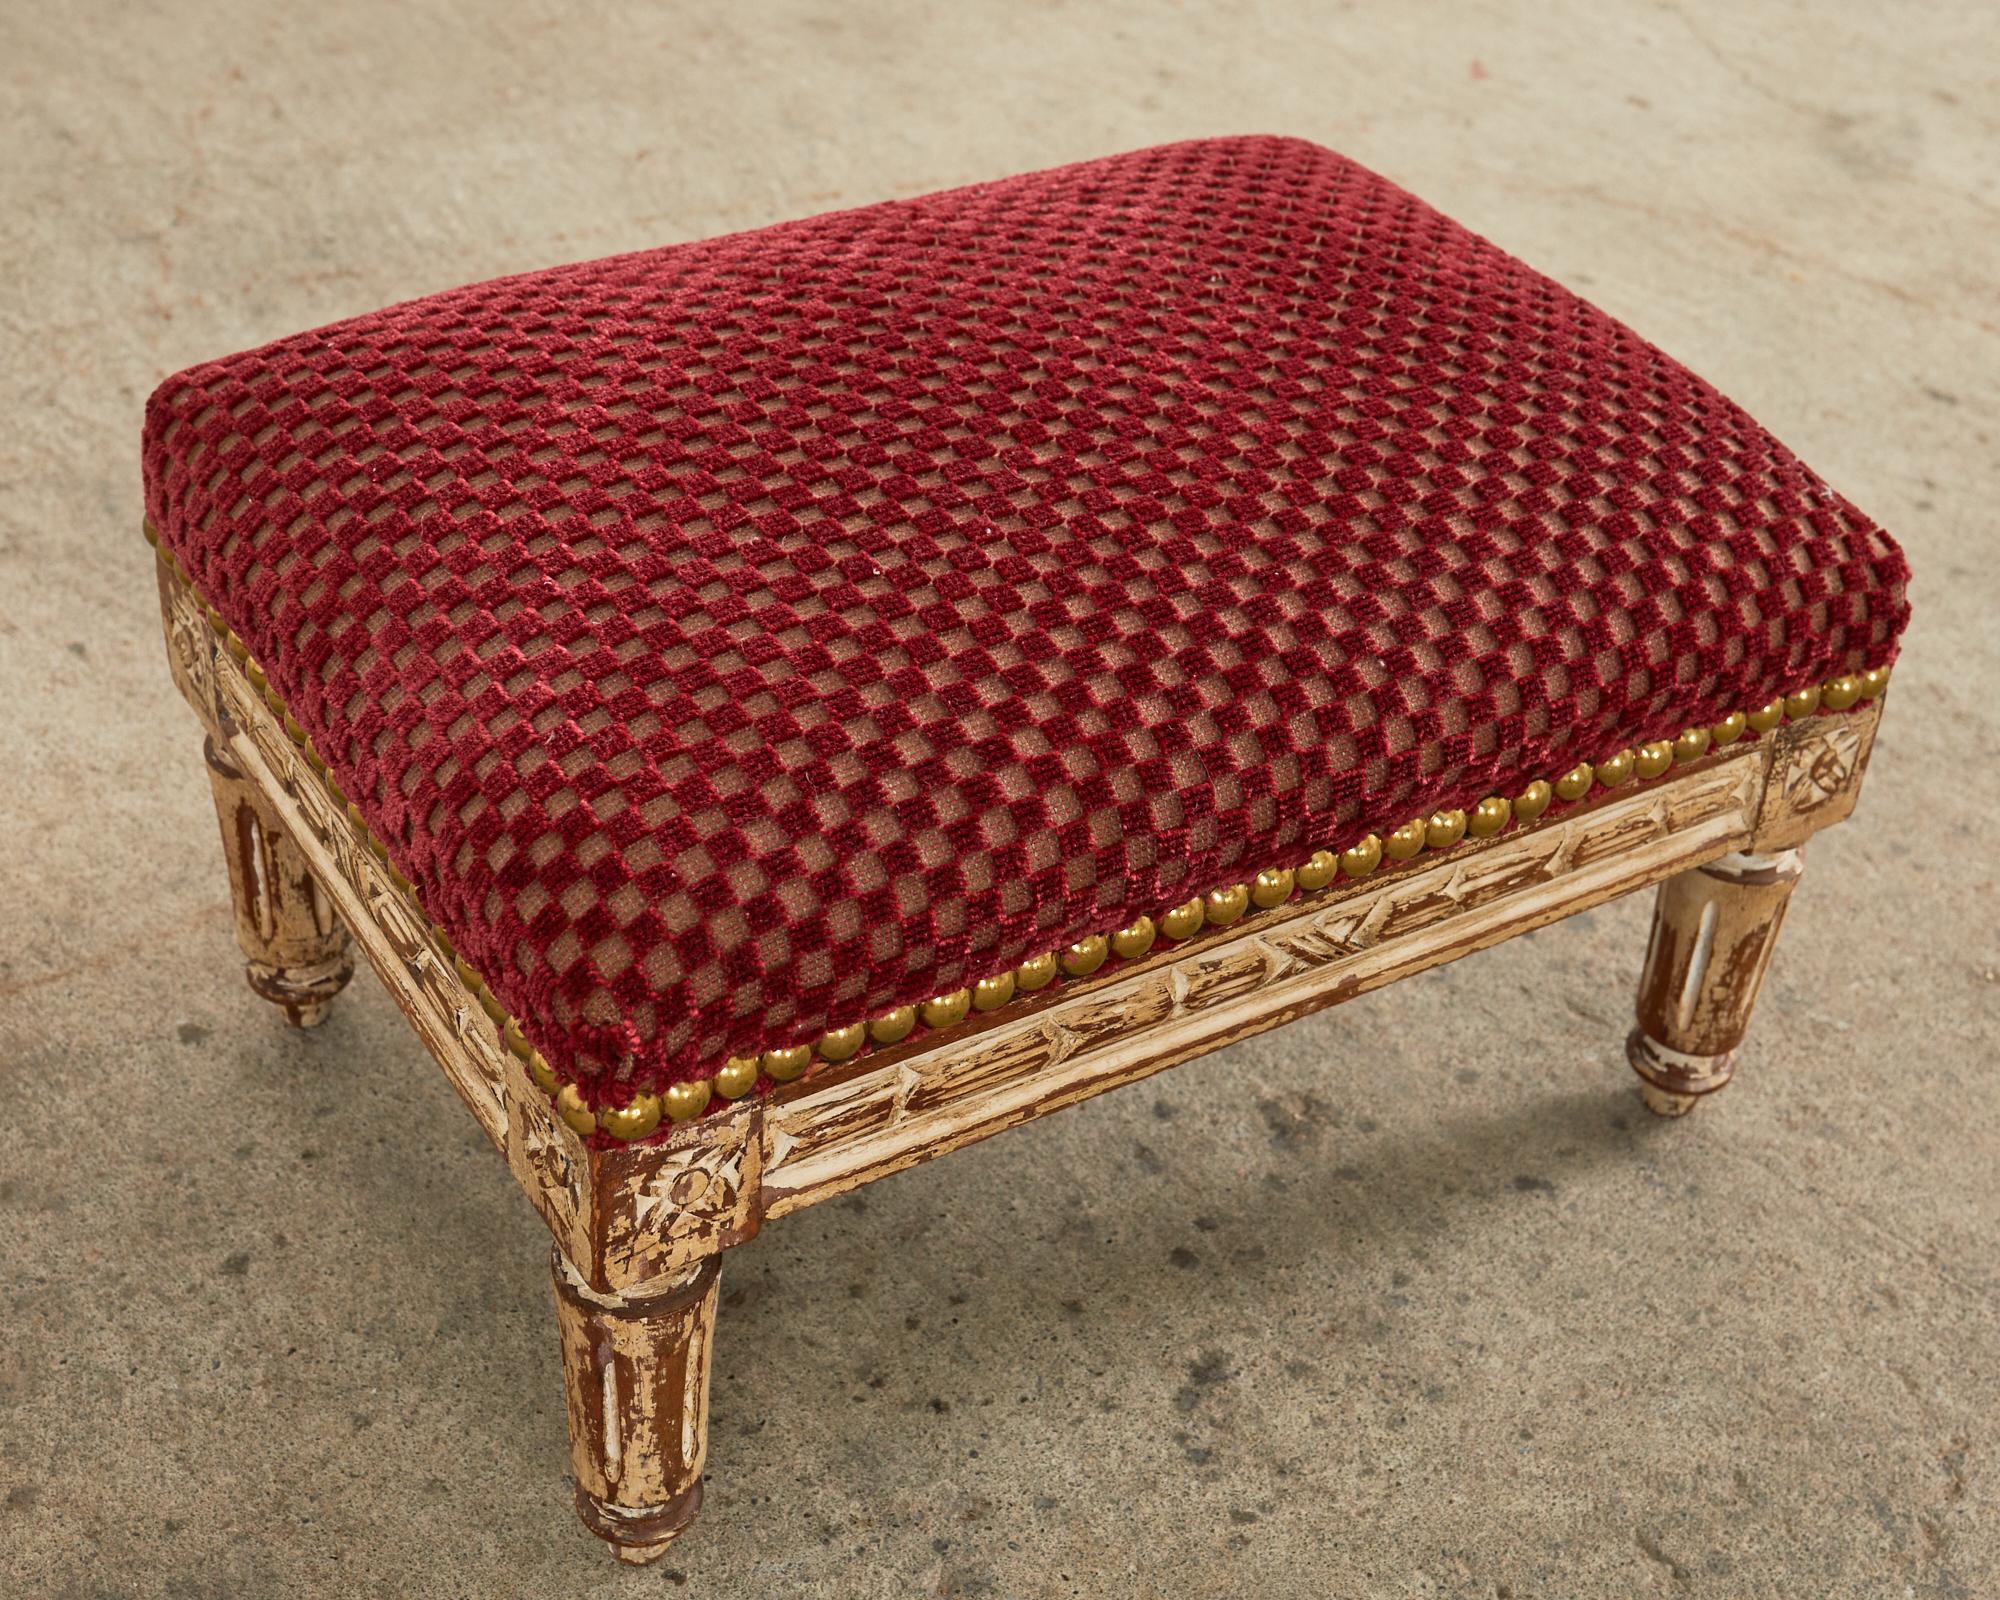 19th Century French Louis XVI Diminutive Painted Mahogany Footstool In Good Condition For Sale In Rio Vista, CA